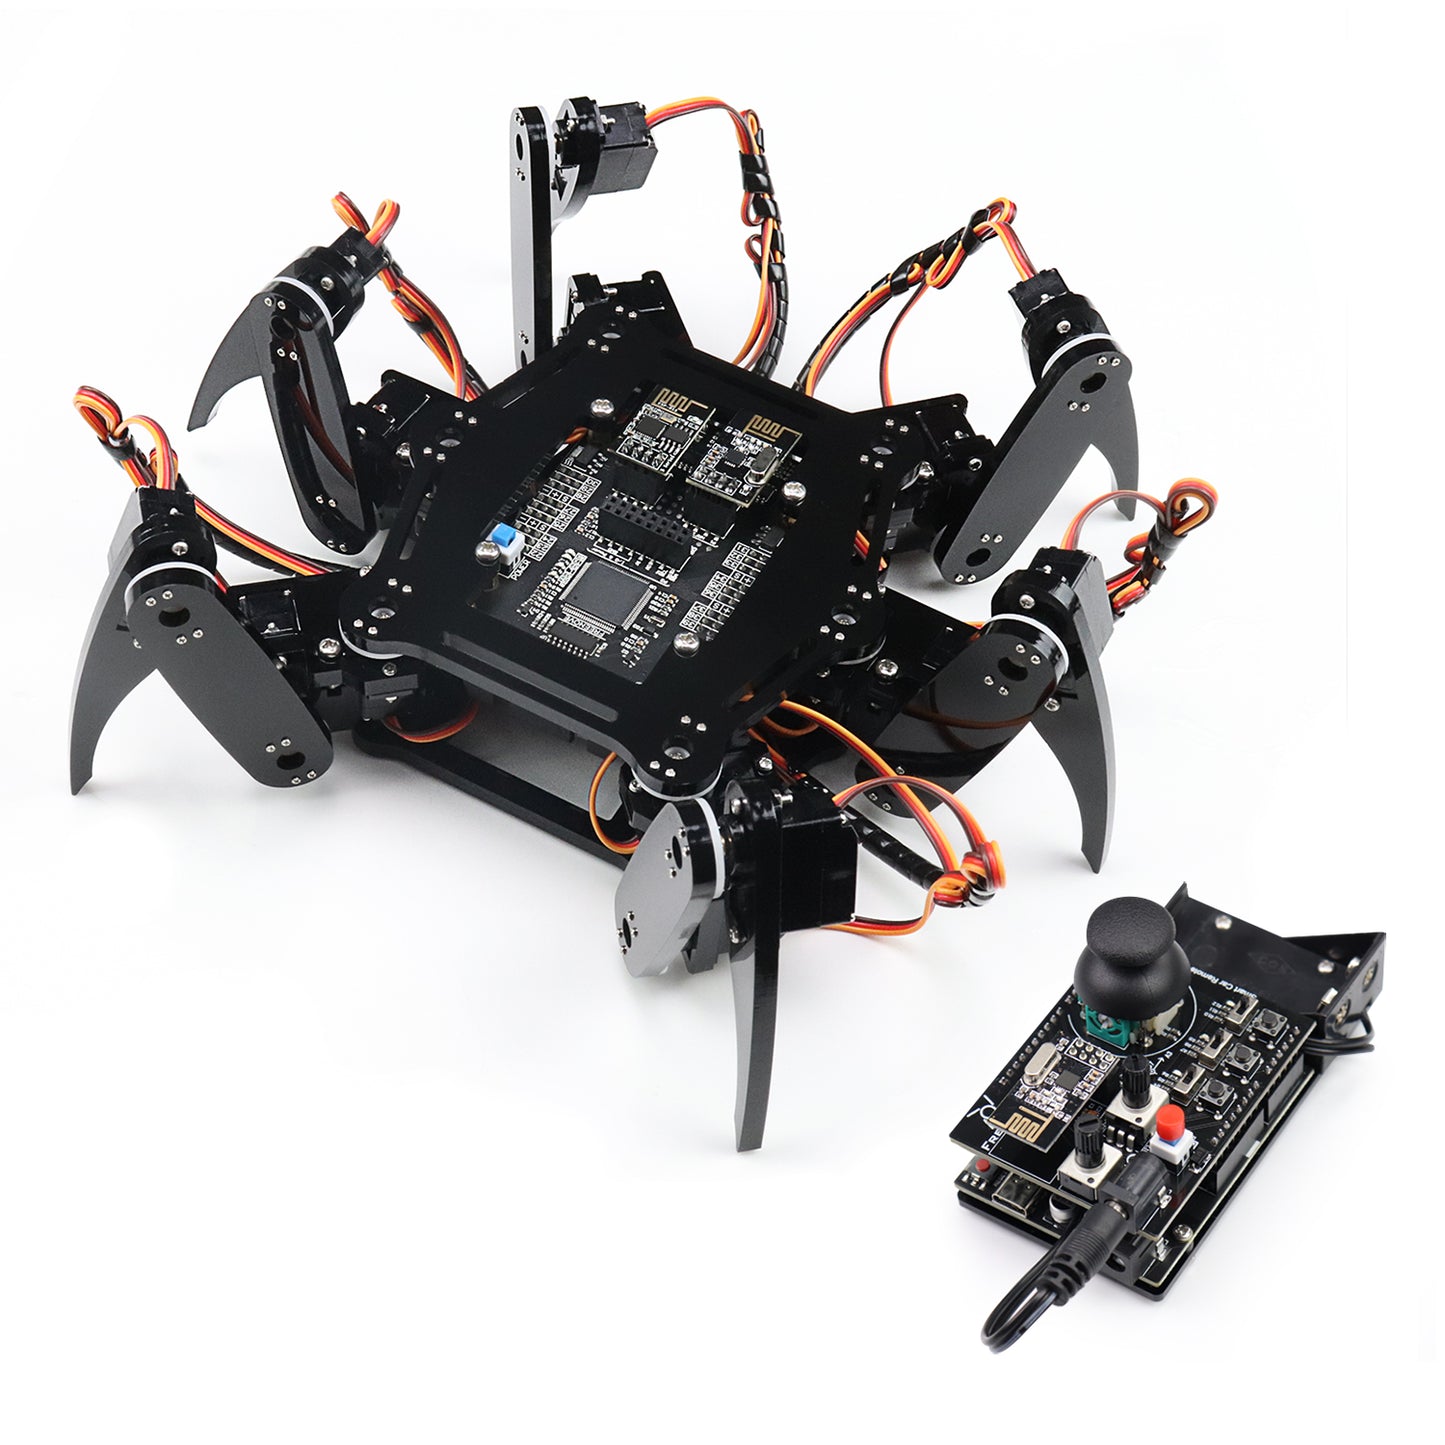 Freenove Hexapod Robot Kit (Compatible with Arduino IDE)